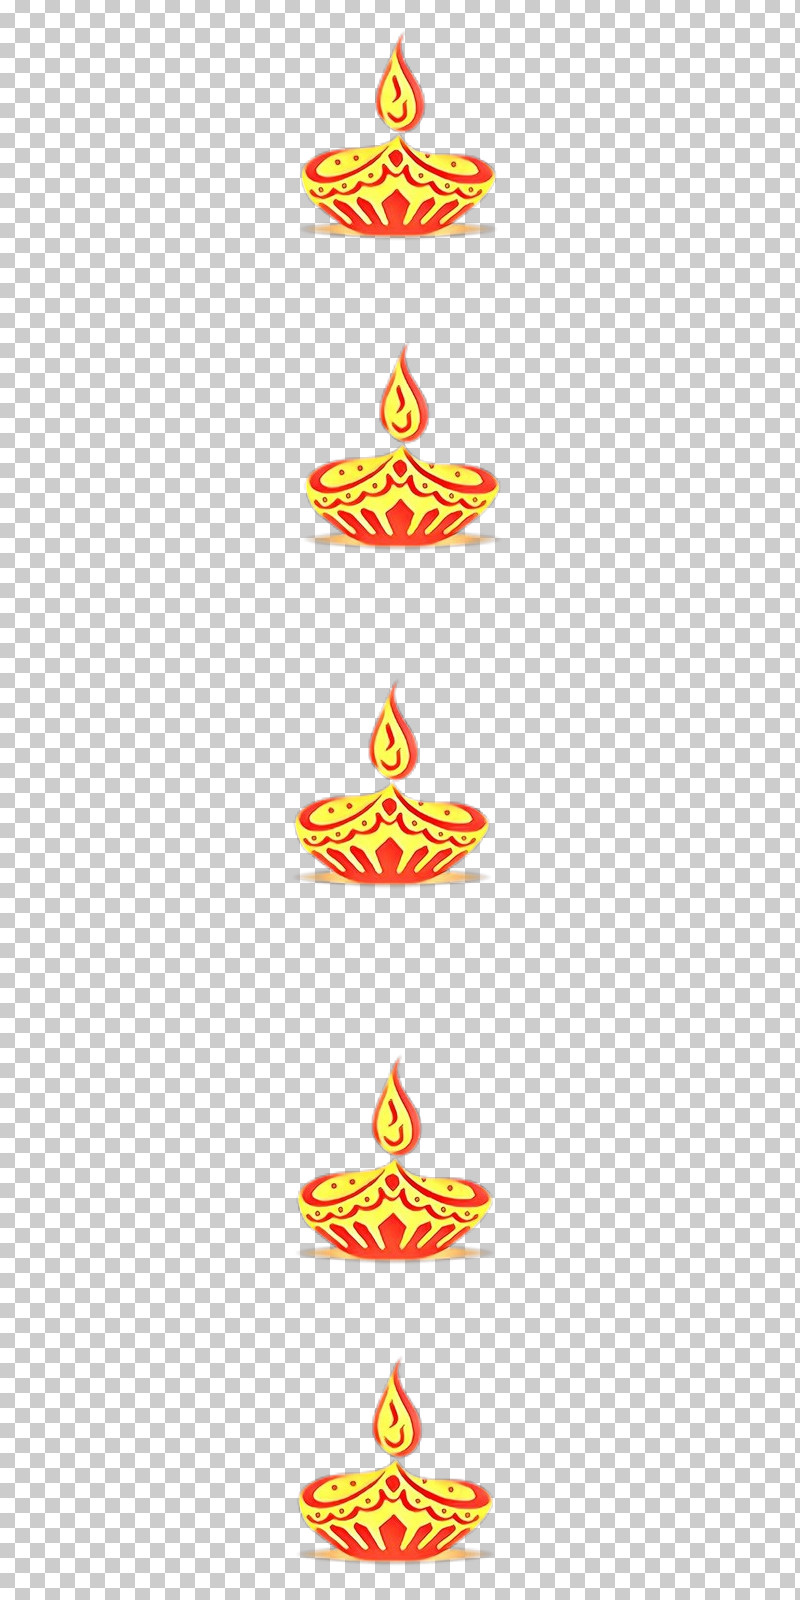 Birthday Candle PNG, Clipart, Birthday Candle, Event, Flame, Orange Free PNG Download